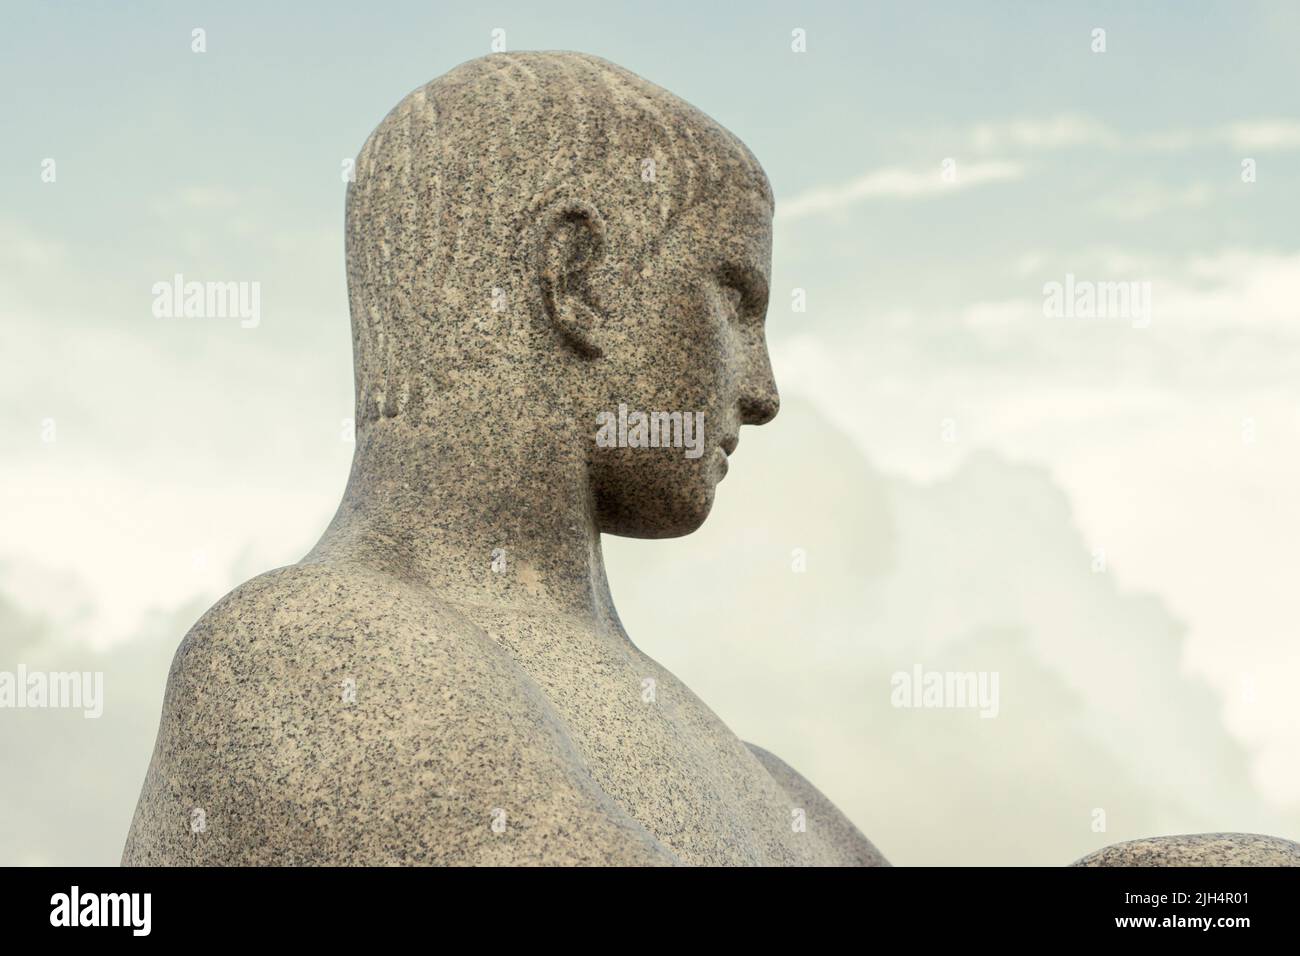 The humans figures made in granite are located inside the Frogner Park. Oslo, Ostlandet. Norway Stock Photo